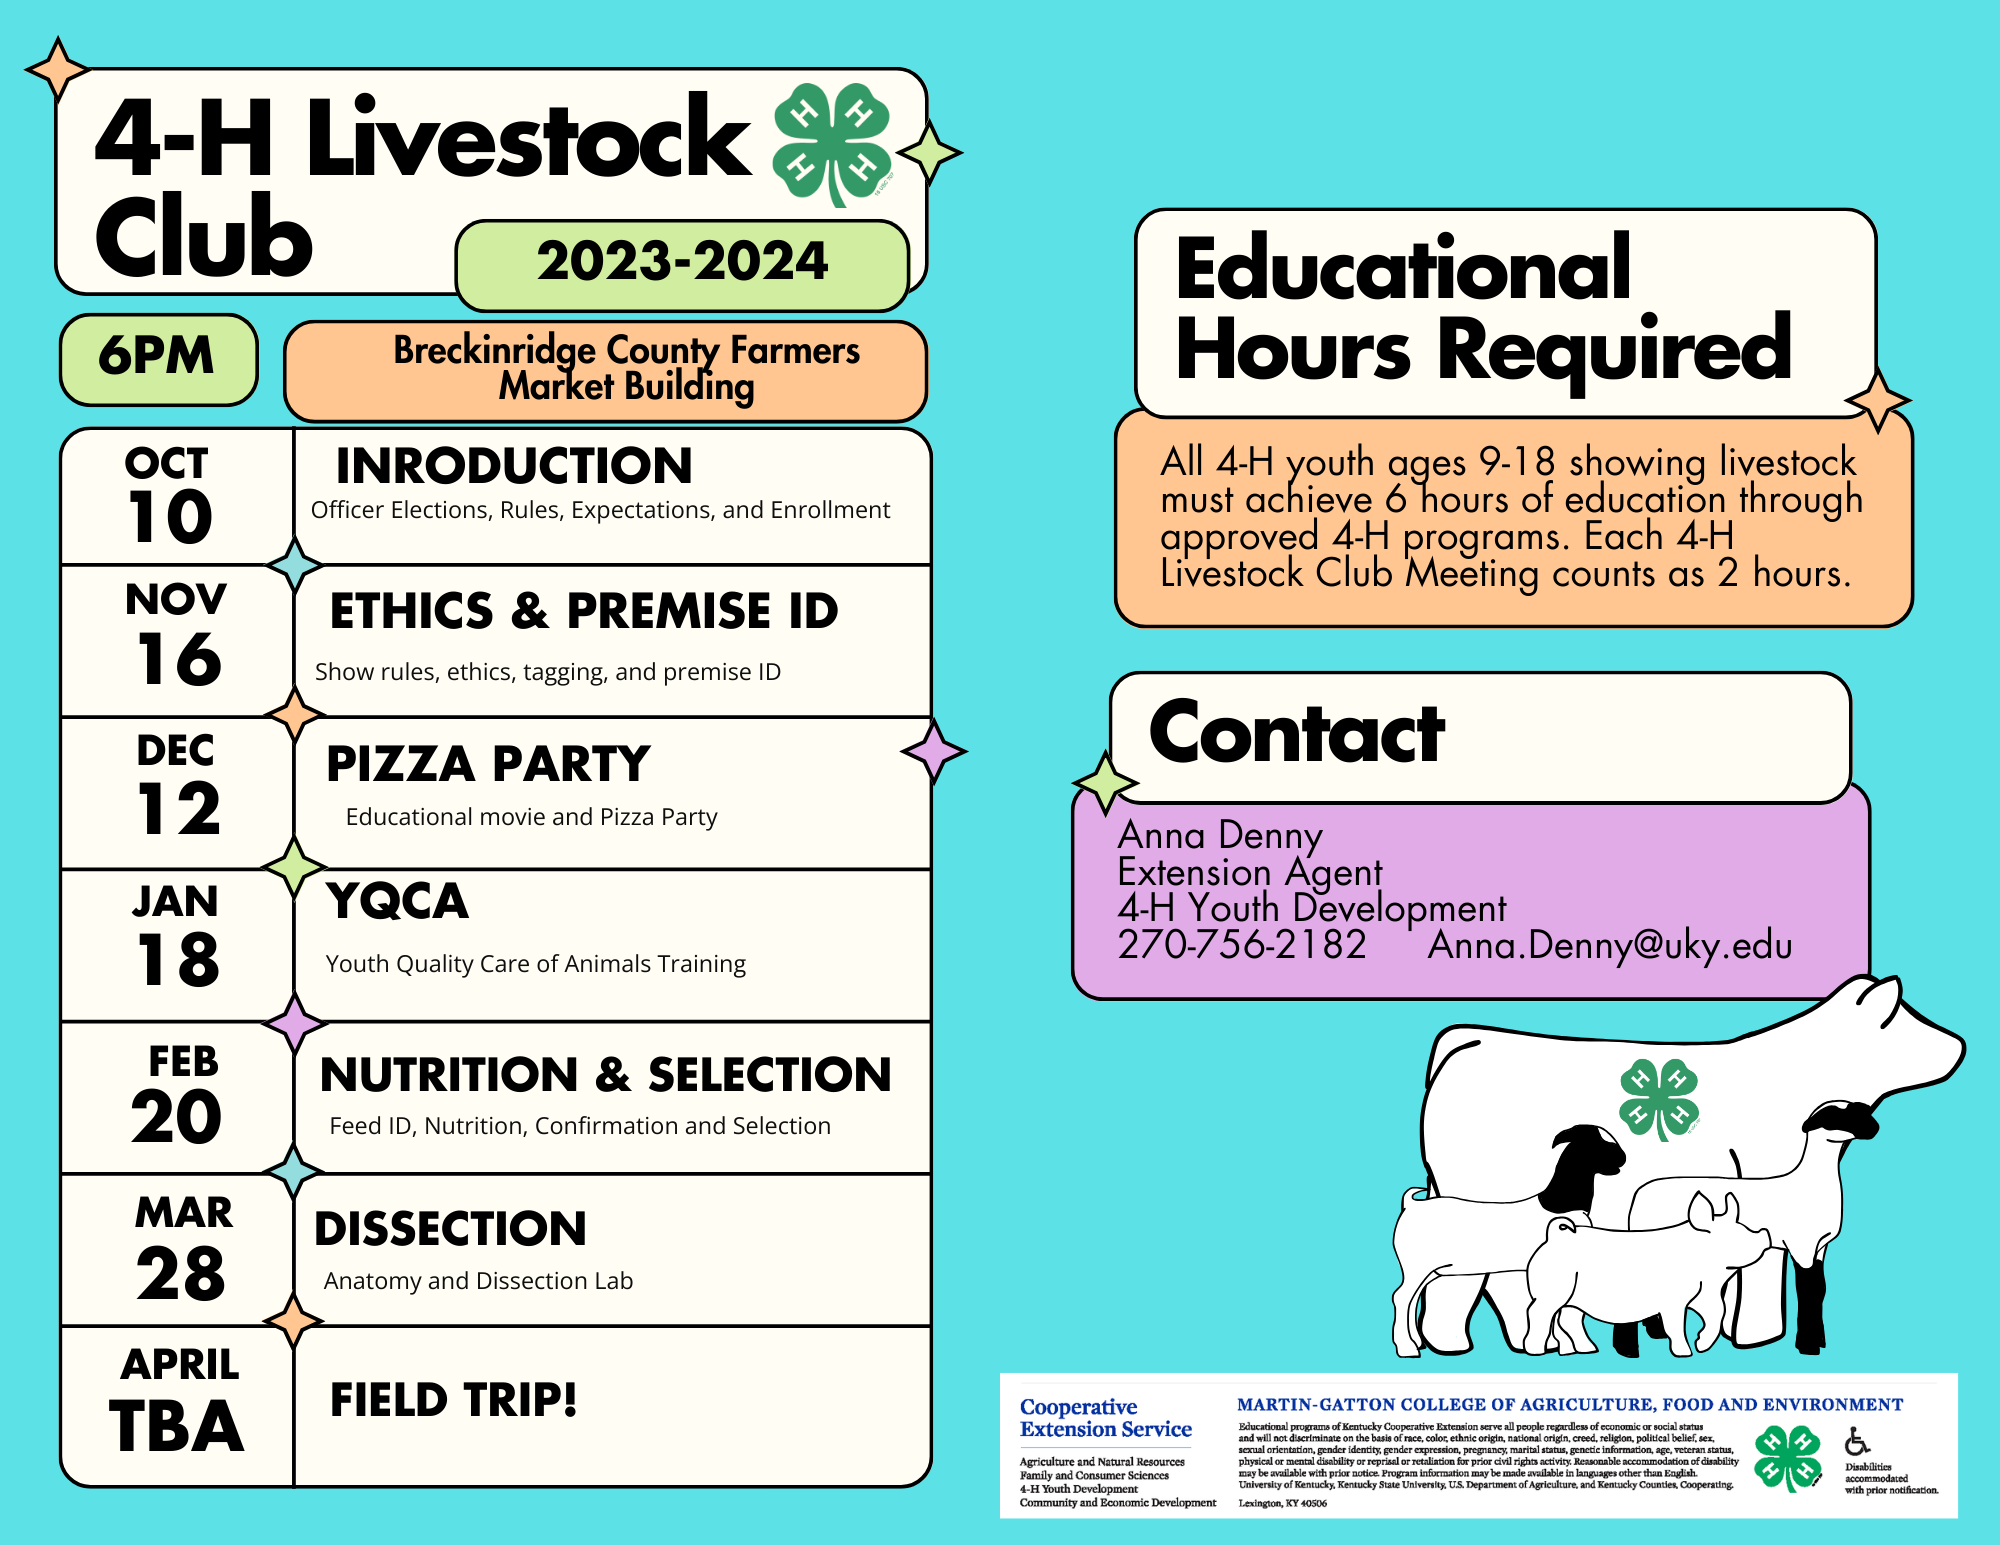 4-H livestock club schedule for 2023-2024